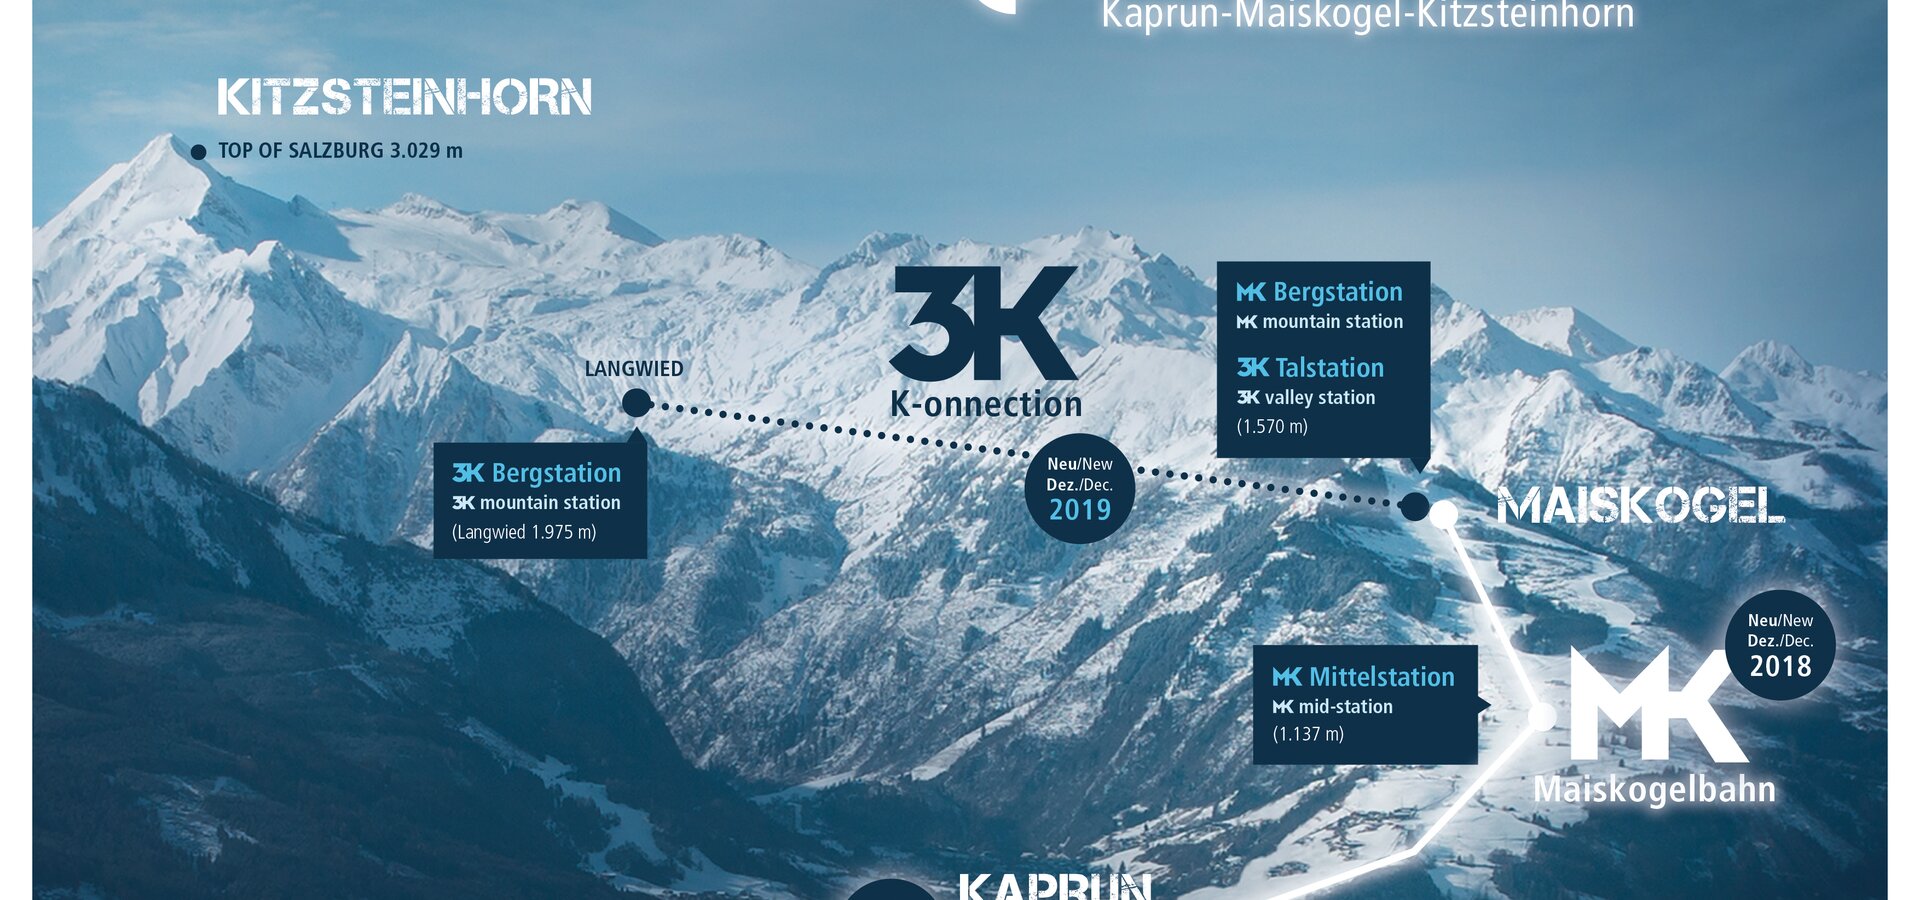 The direct connection from the town of Kaprun /Maiskogel to the glacier: This ambitious project of Gletscherbahnen Kaprun AG will represent the longest continuous lift axis (12 km) spanning the greatest elevation change in the Eastern Alps | © Kitzsteinhorn